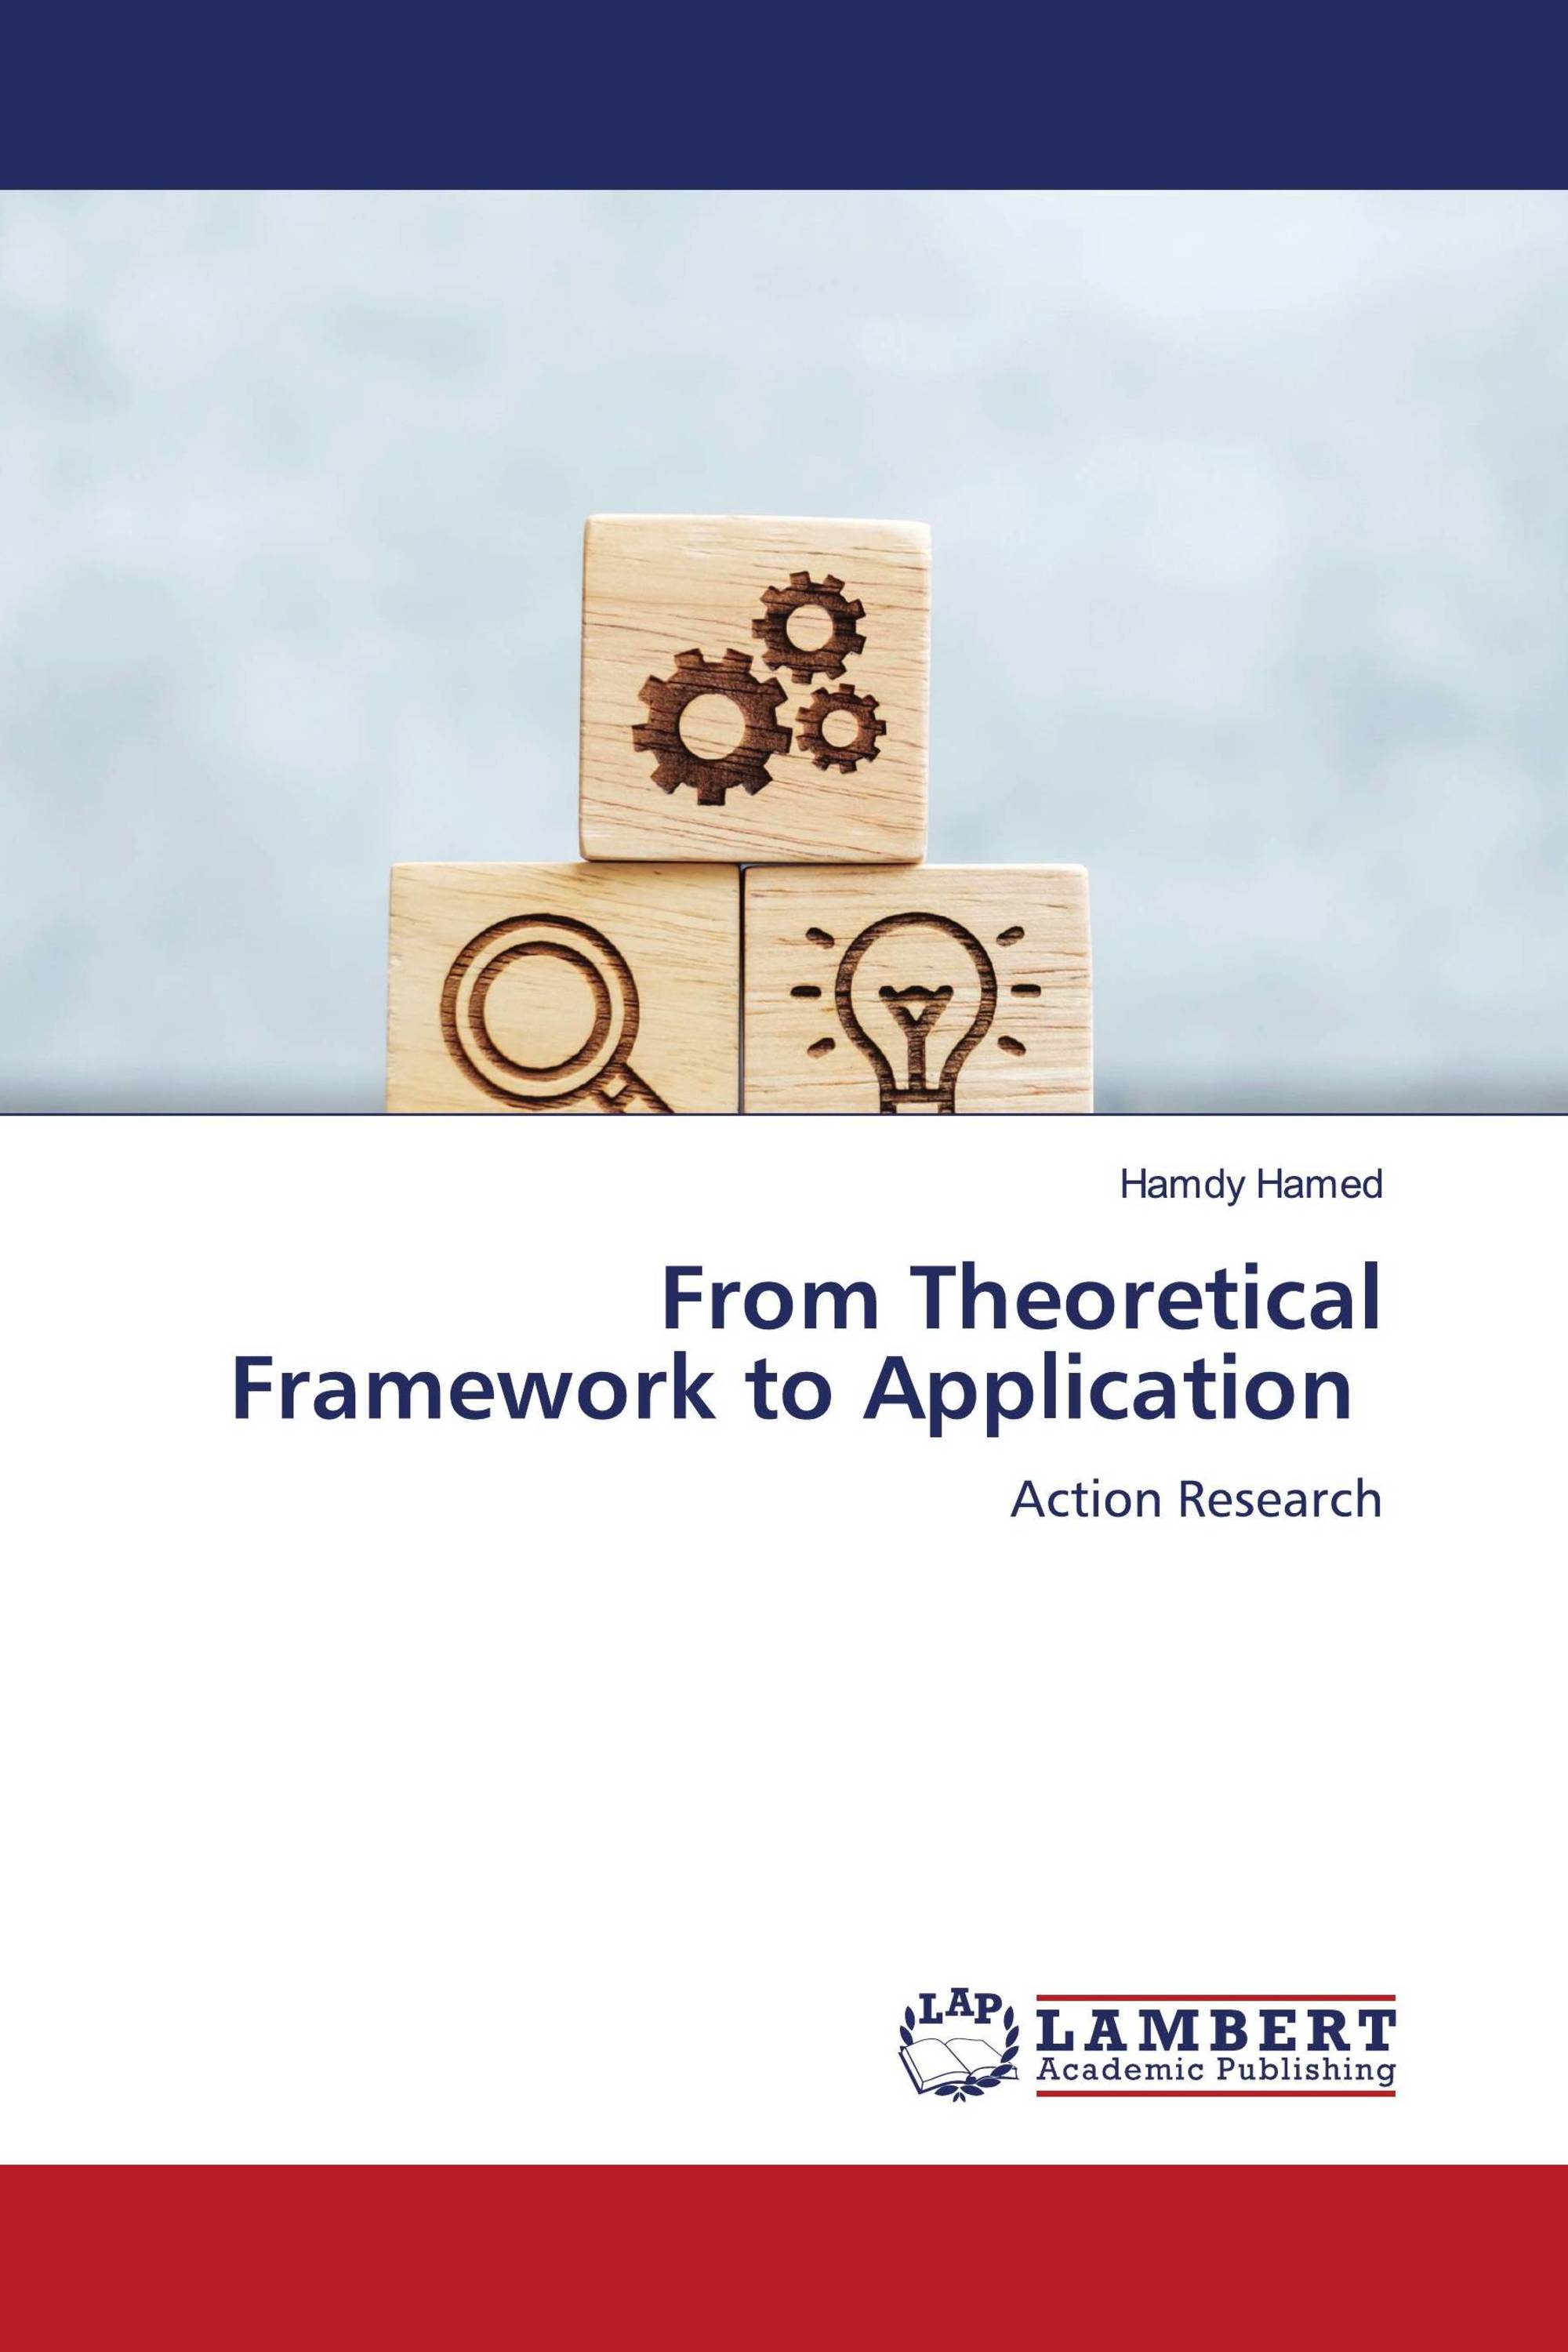 From Theoretical Framework to Application